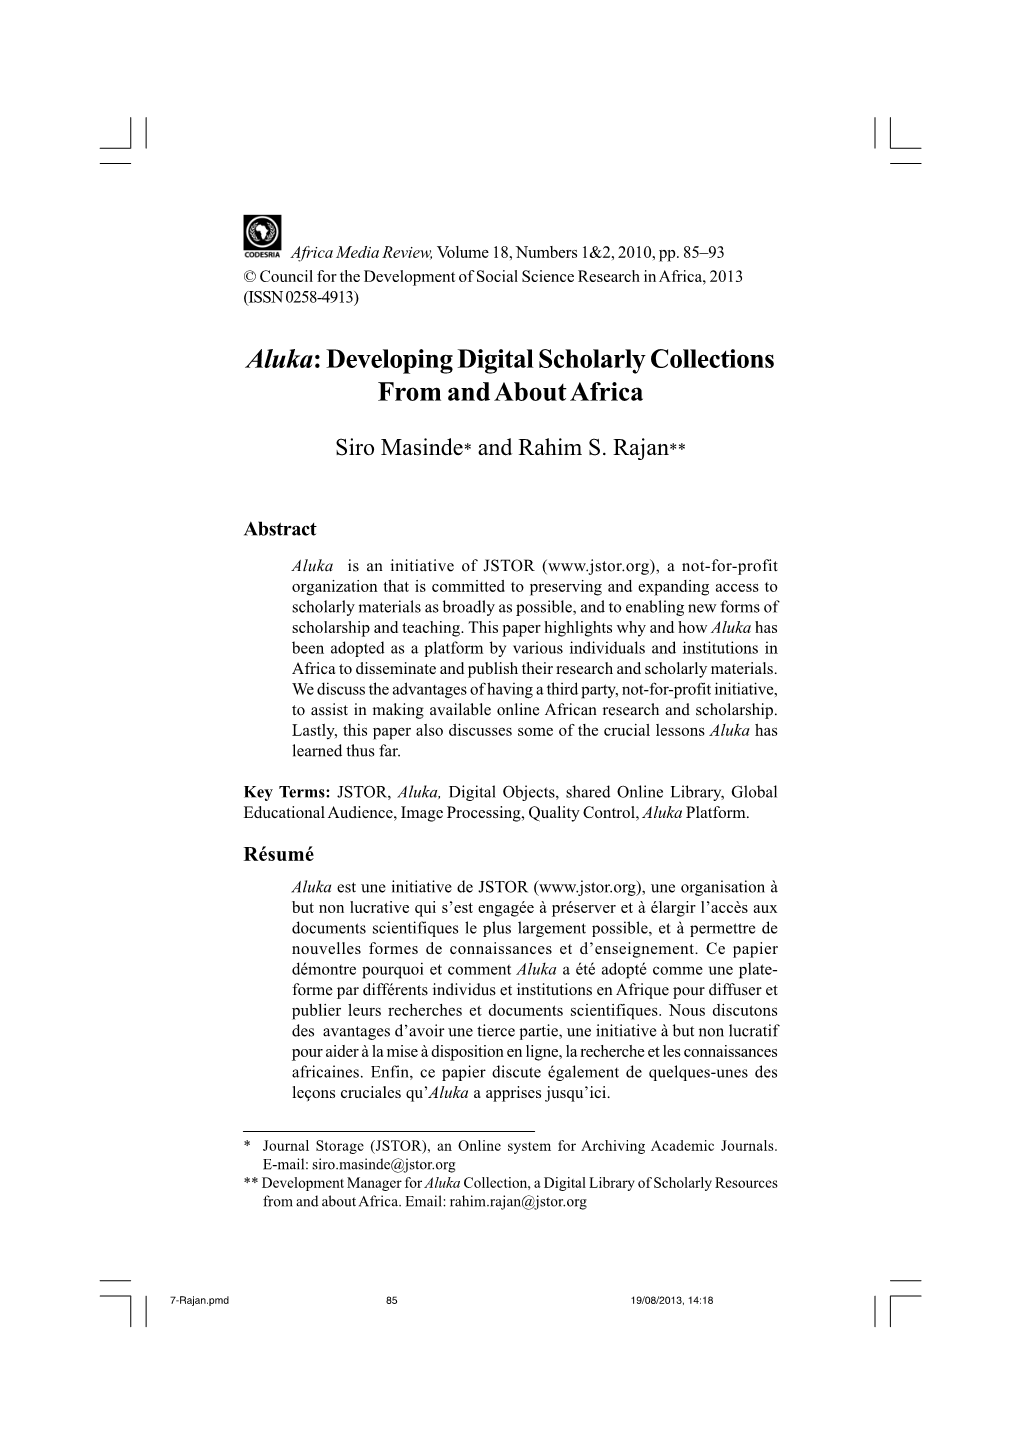 Aluka: Developing Digital Scholarly Collections from and About Africa